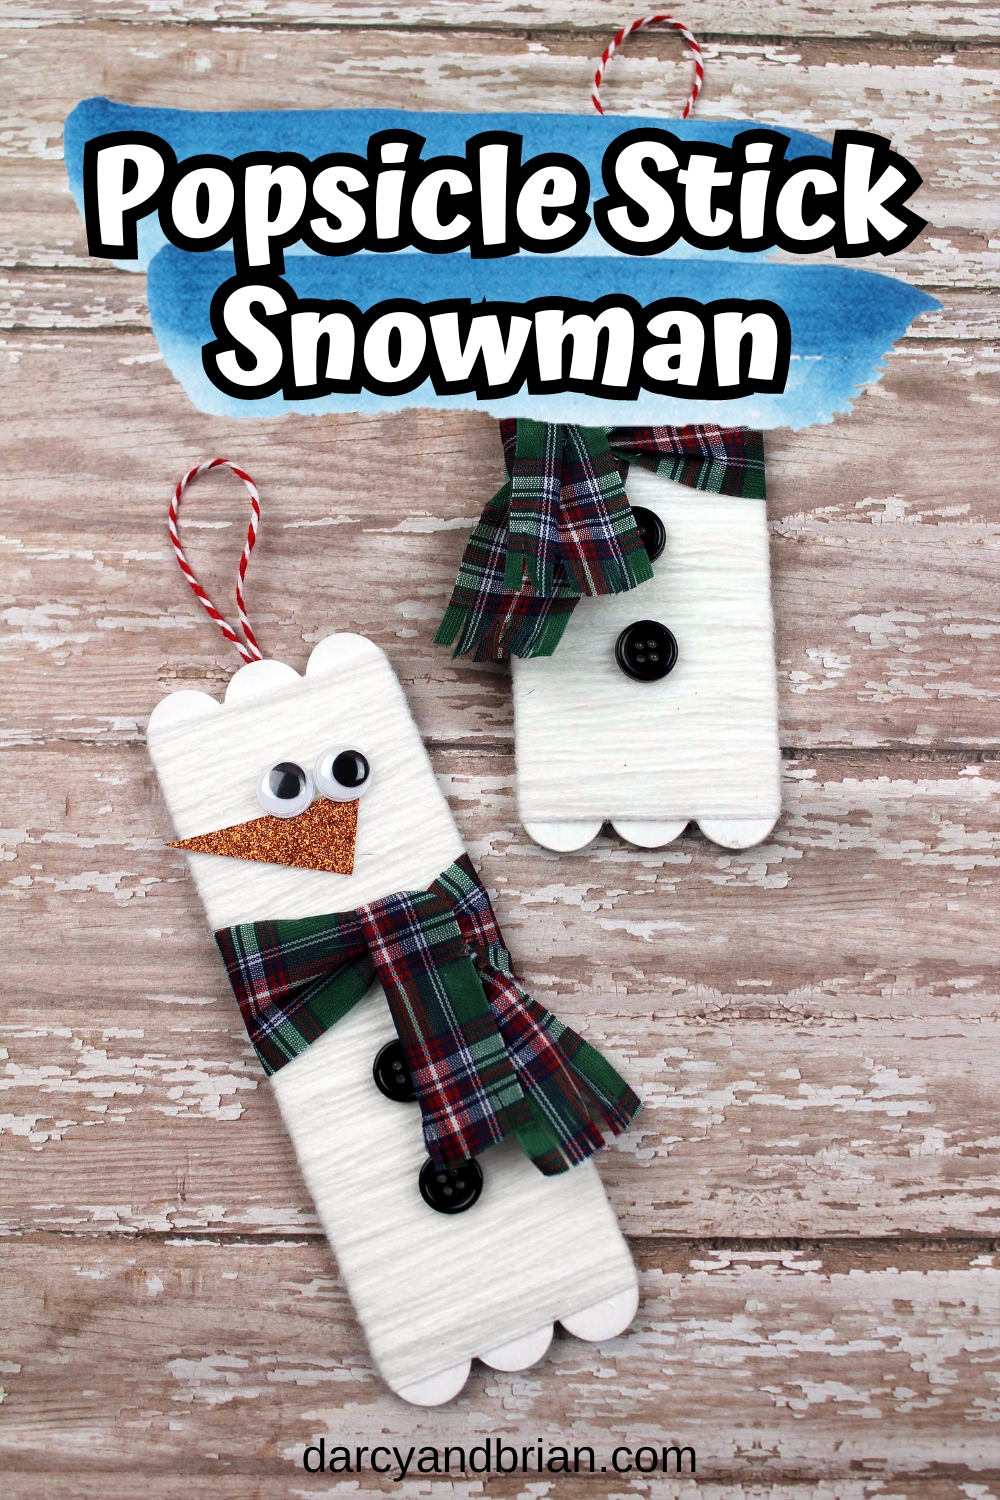 Easy Popsicle Stick Snowman Craft for Kids - Artsy Craftsy Mom